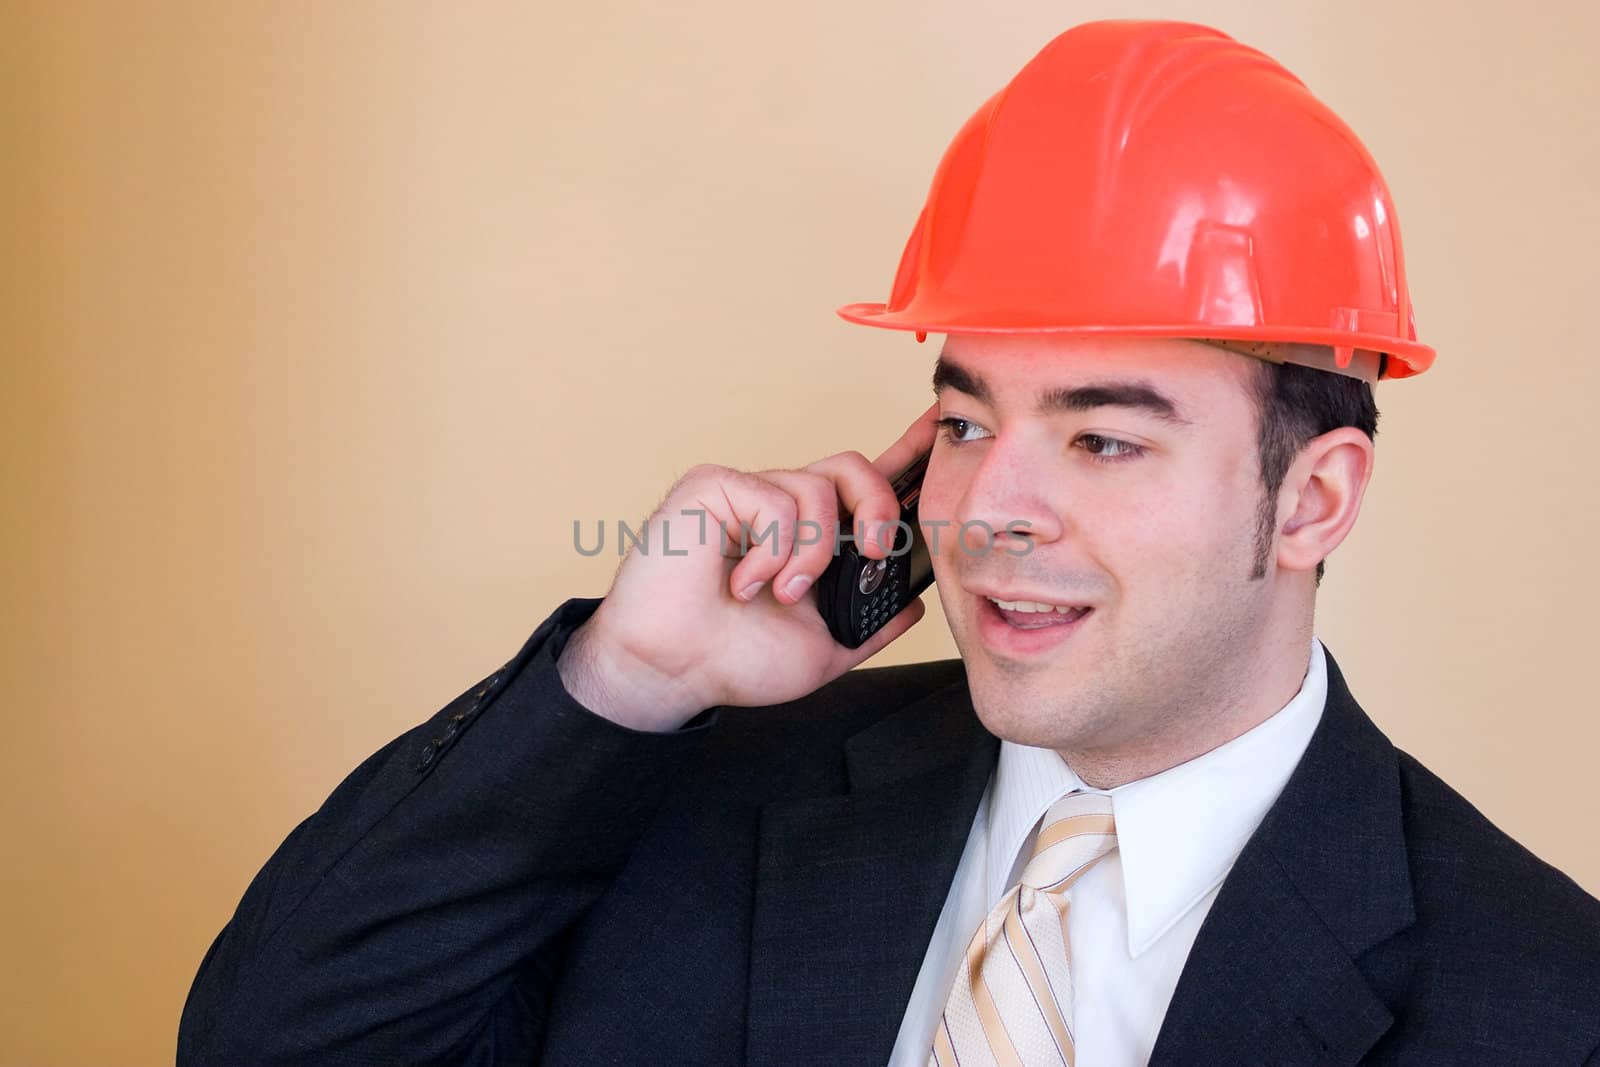 A man in a business suit and hard hat talks on his cell phone.  He could be a custom home builder or even an engineer or architect.